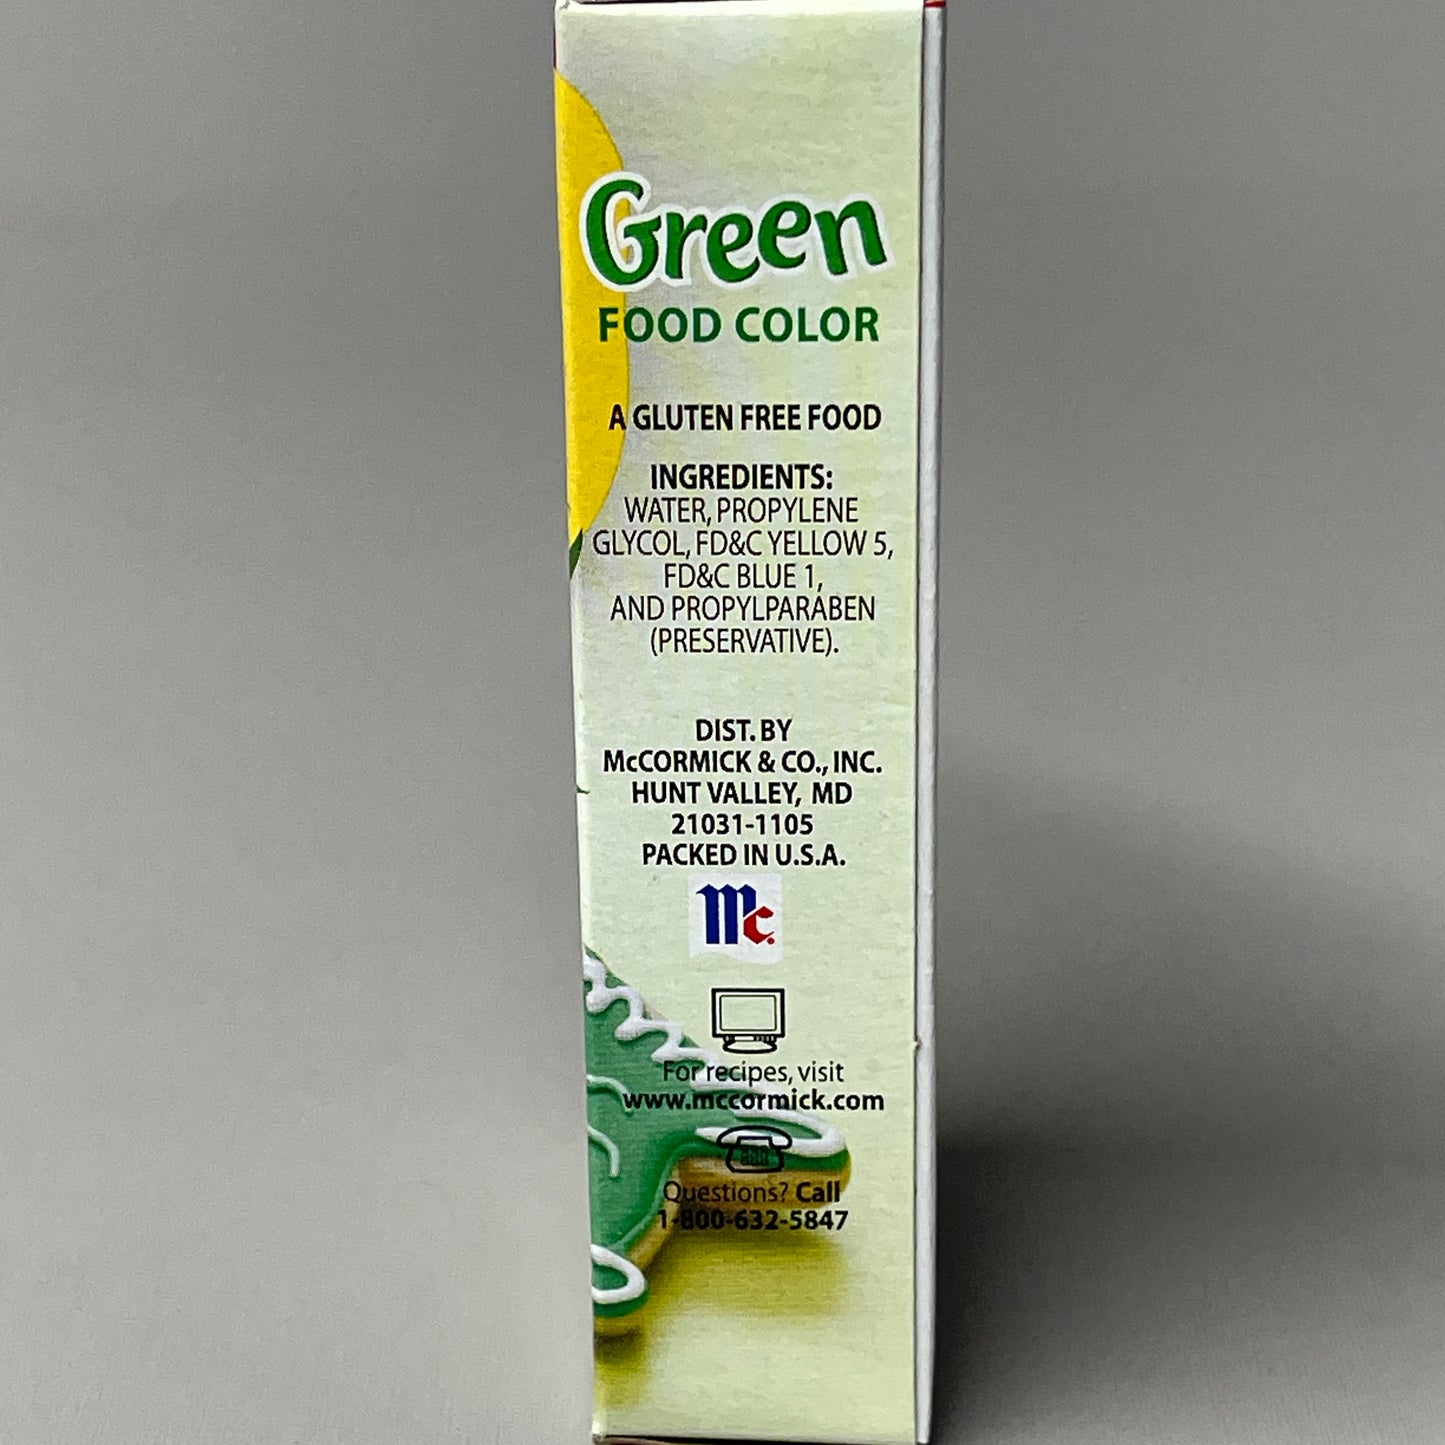 MCCORMICK Green Food Color (Food Coloring) 1.0 fl oz (29 ml) Best By 4/25 (New)